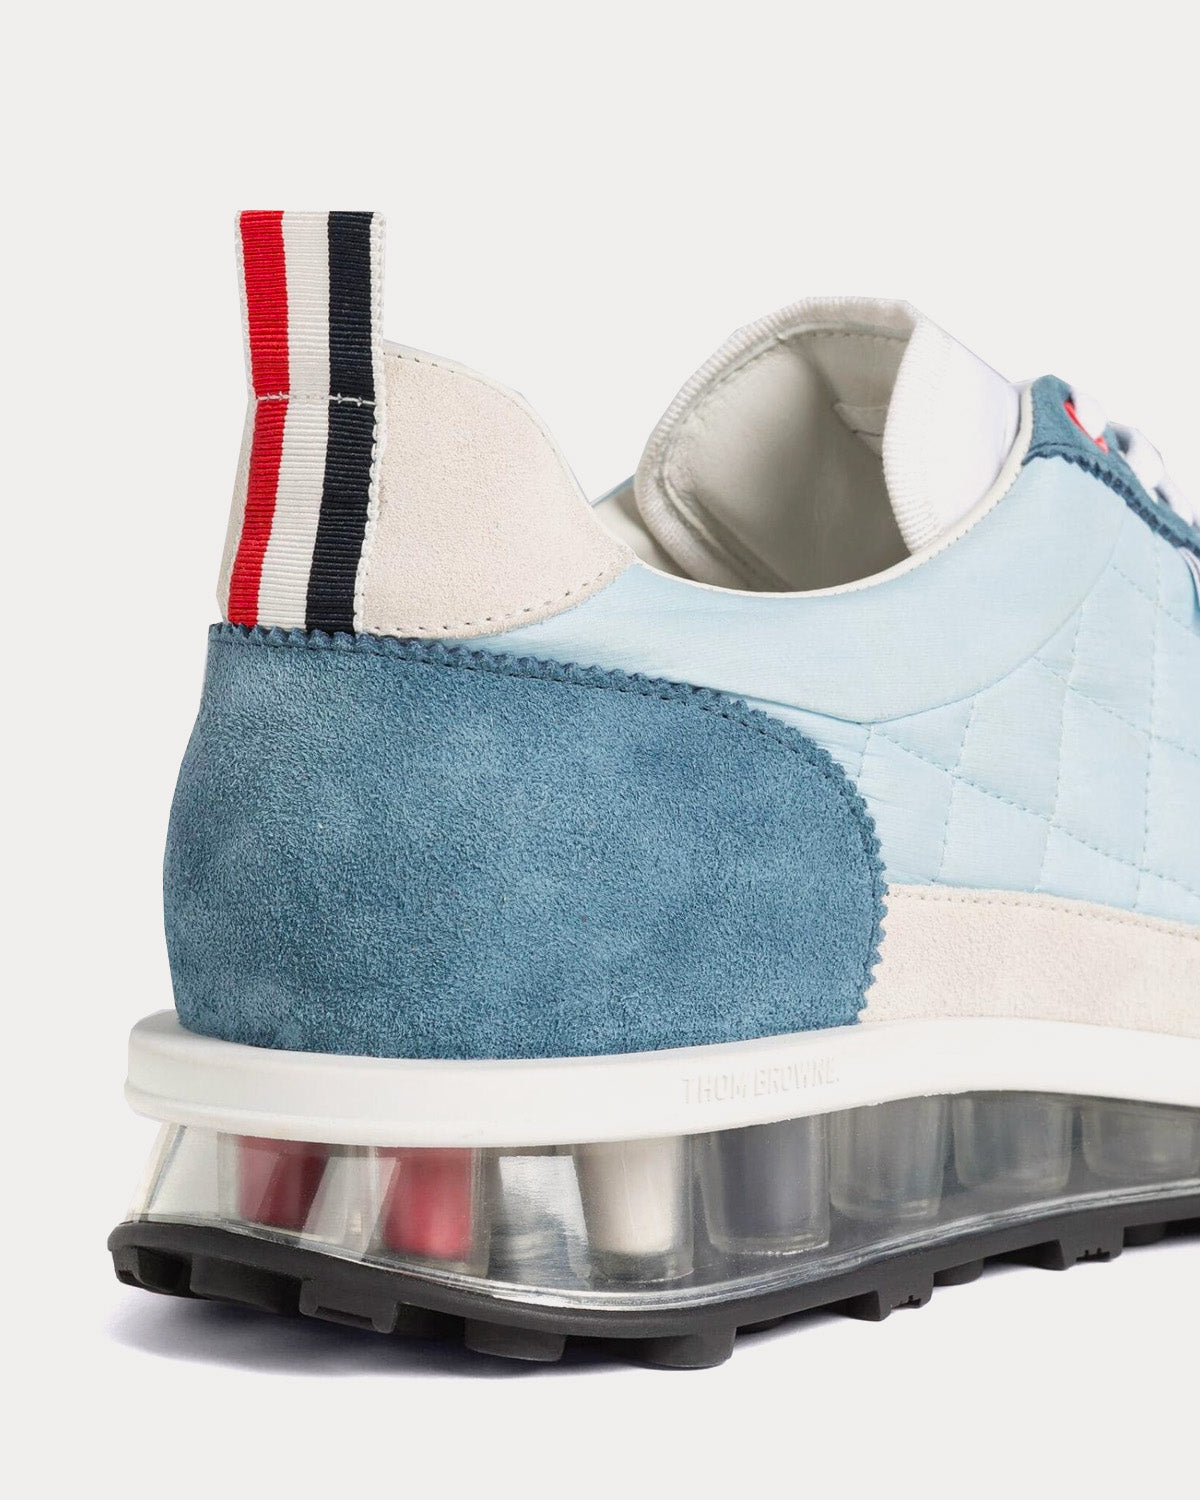 Thom Browne - Tech Runner Quilted Blue Low Top Sneakers